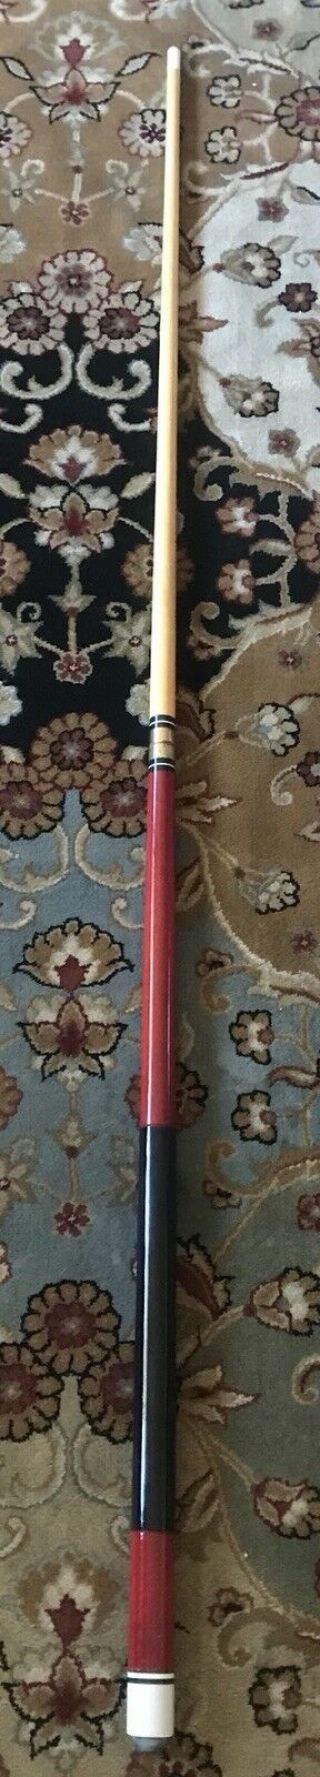 Vintage Victory Pool Cue Stick with Red Felt Lined Case 2